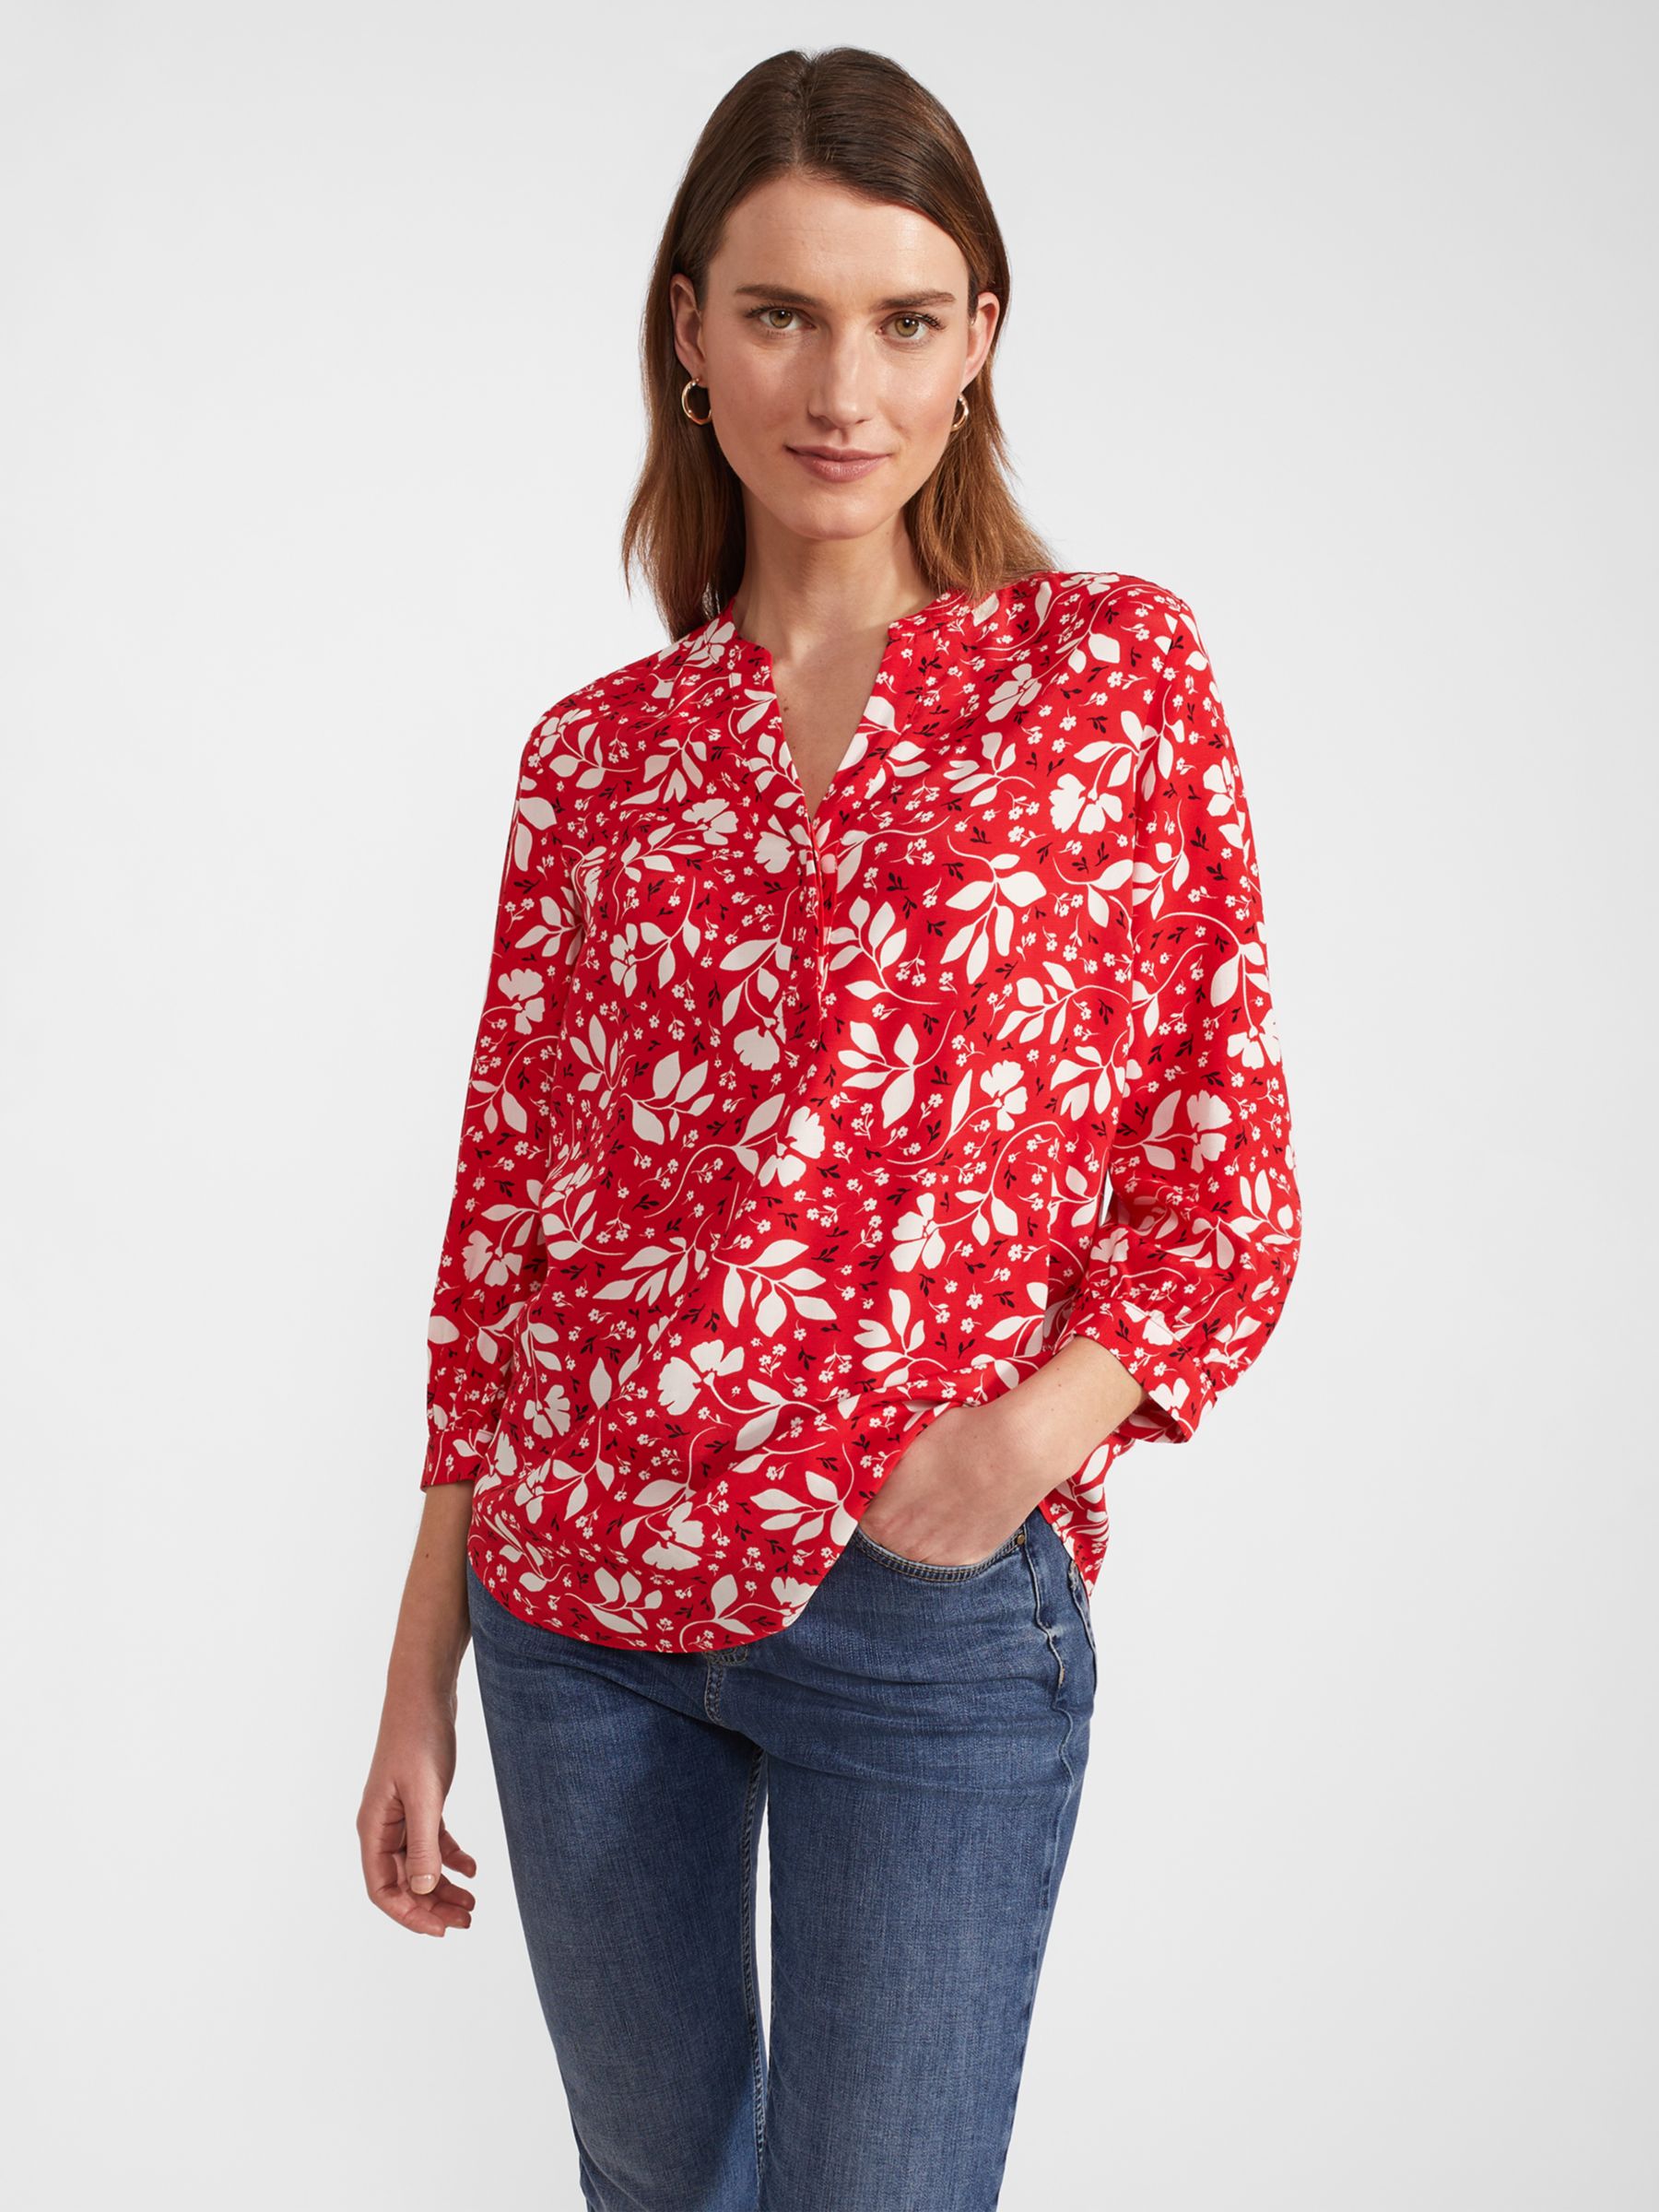 Hobbs Essie Floral Notch Neck Blouse, Red/Multi at John Lewis & Partners